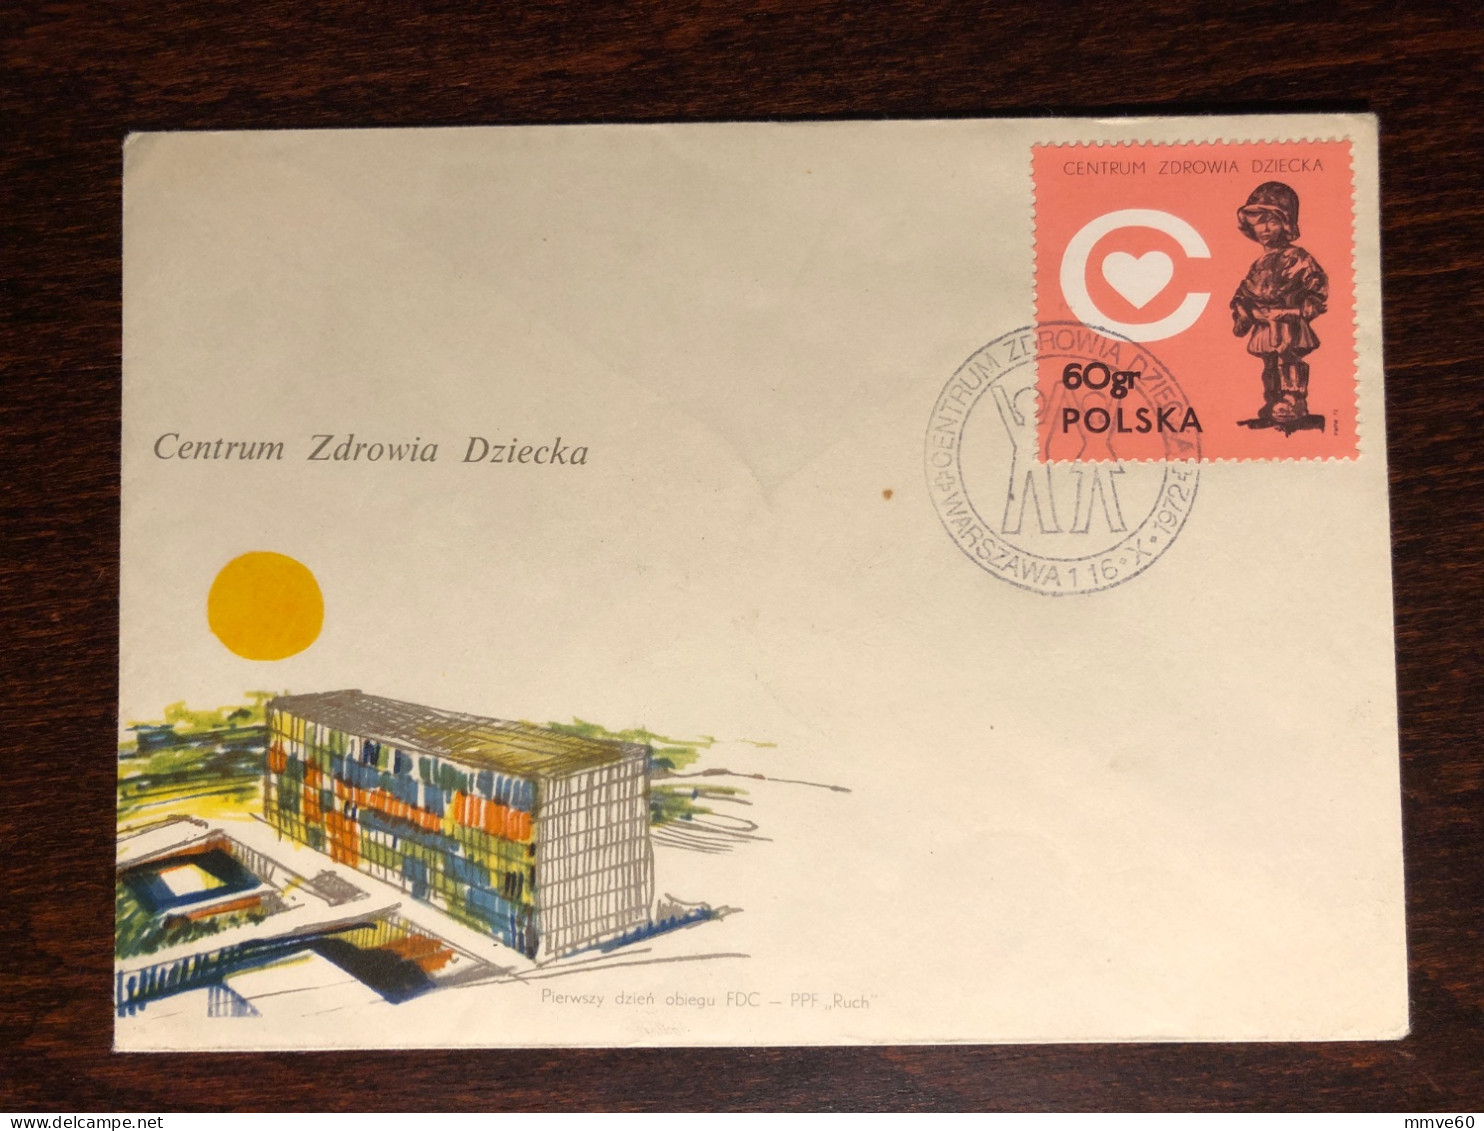 POLAND FDC COVER 1972 YEAR CHILDREN HOSPITAL HEALTH MEDICINE STAMPS - FDC